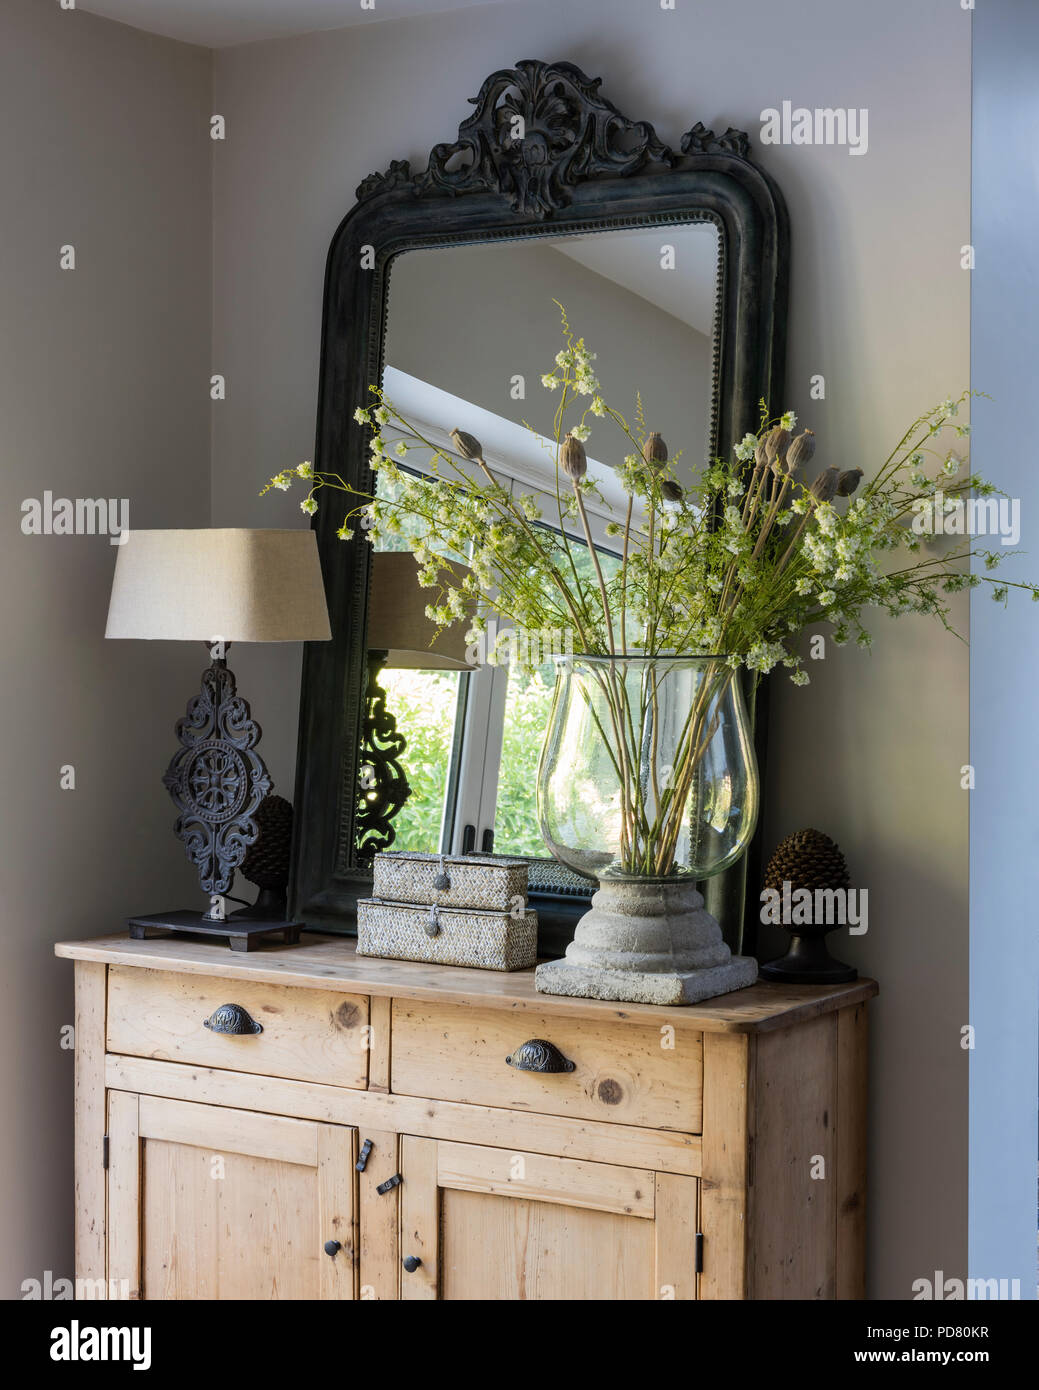 Large Mirror On Wooden Dresser With Table Lamp And Large Glass